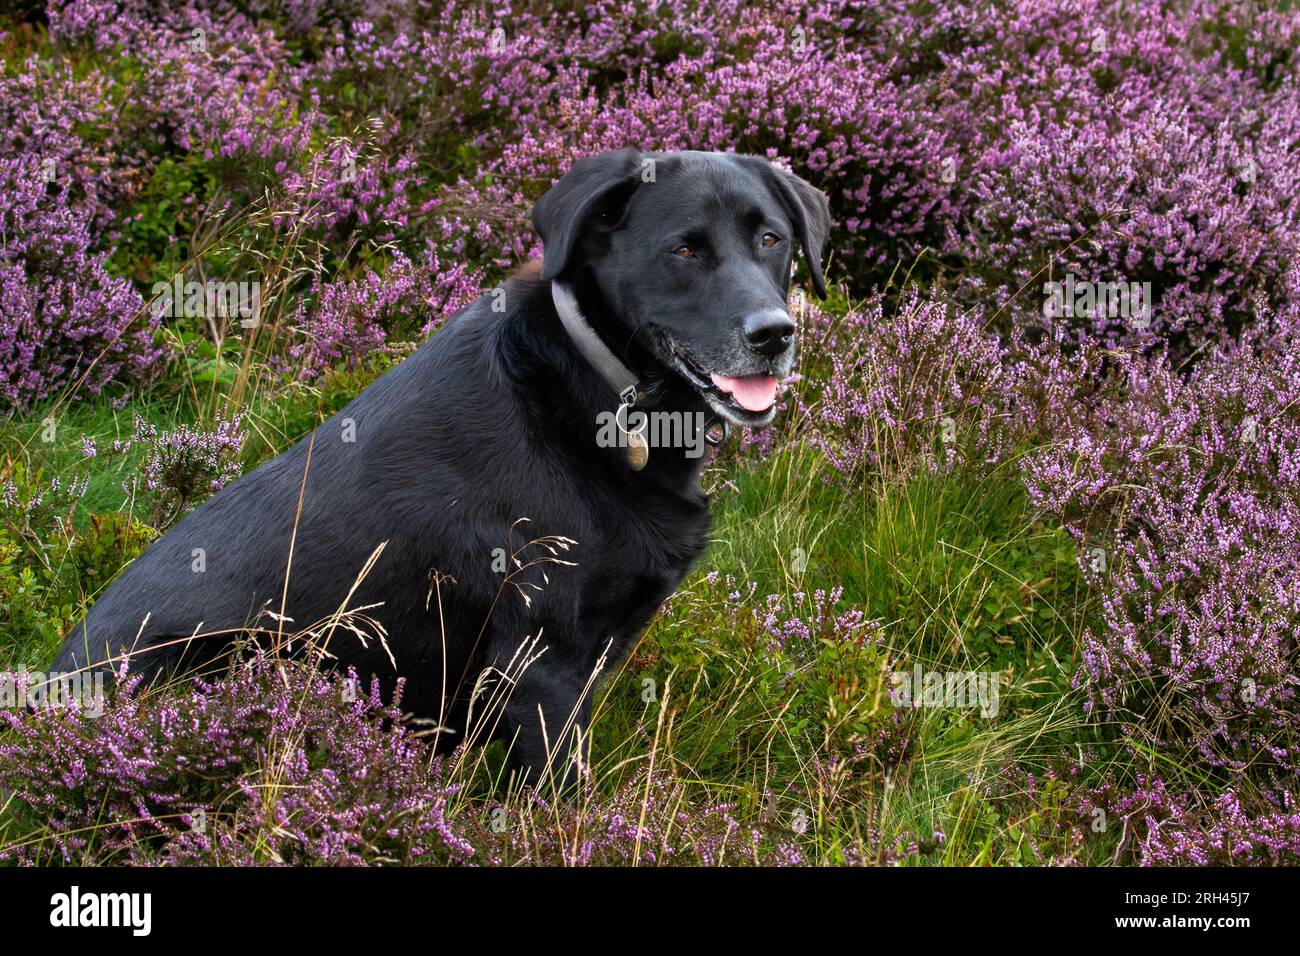 A black labrador retriever sitting in moorland heather (ling). Stock Photo